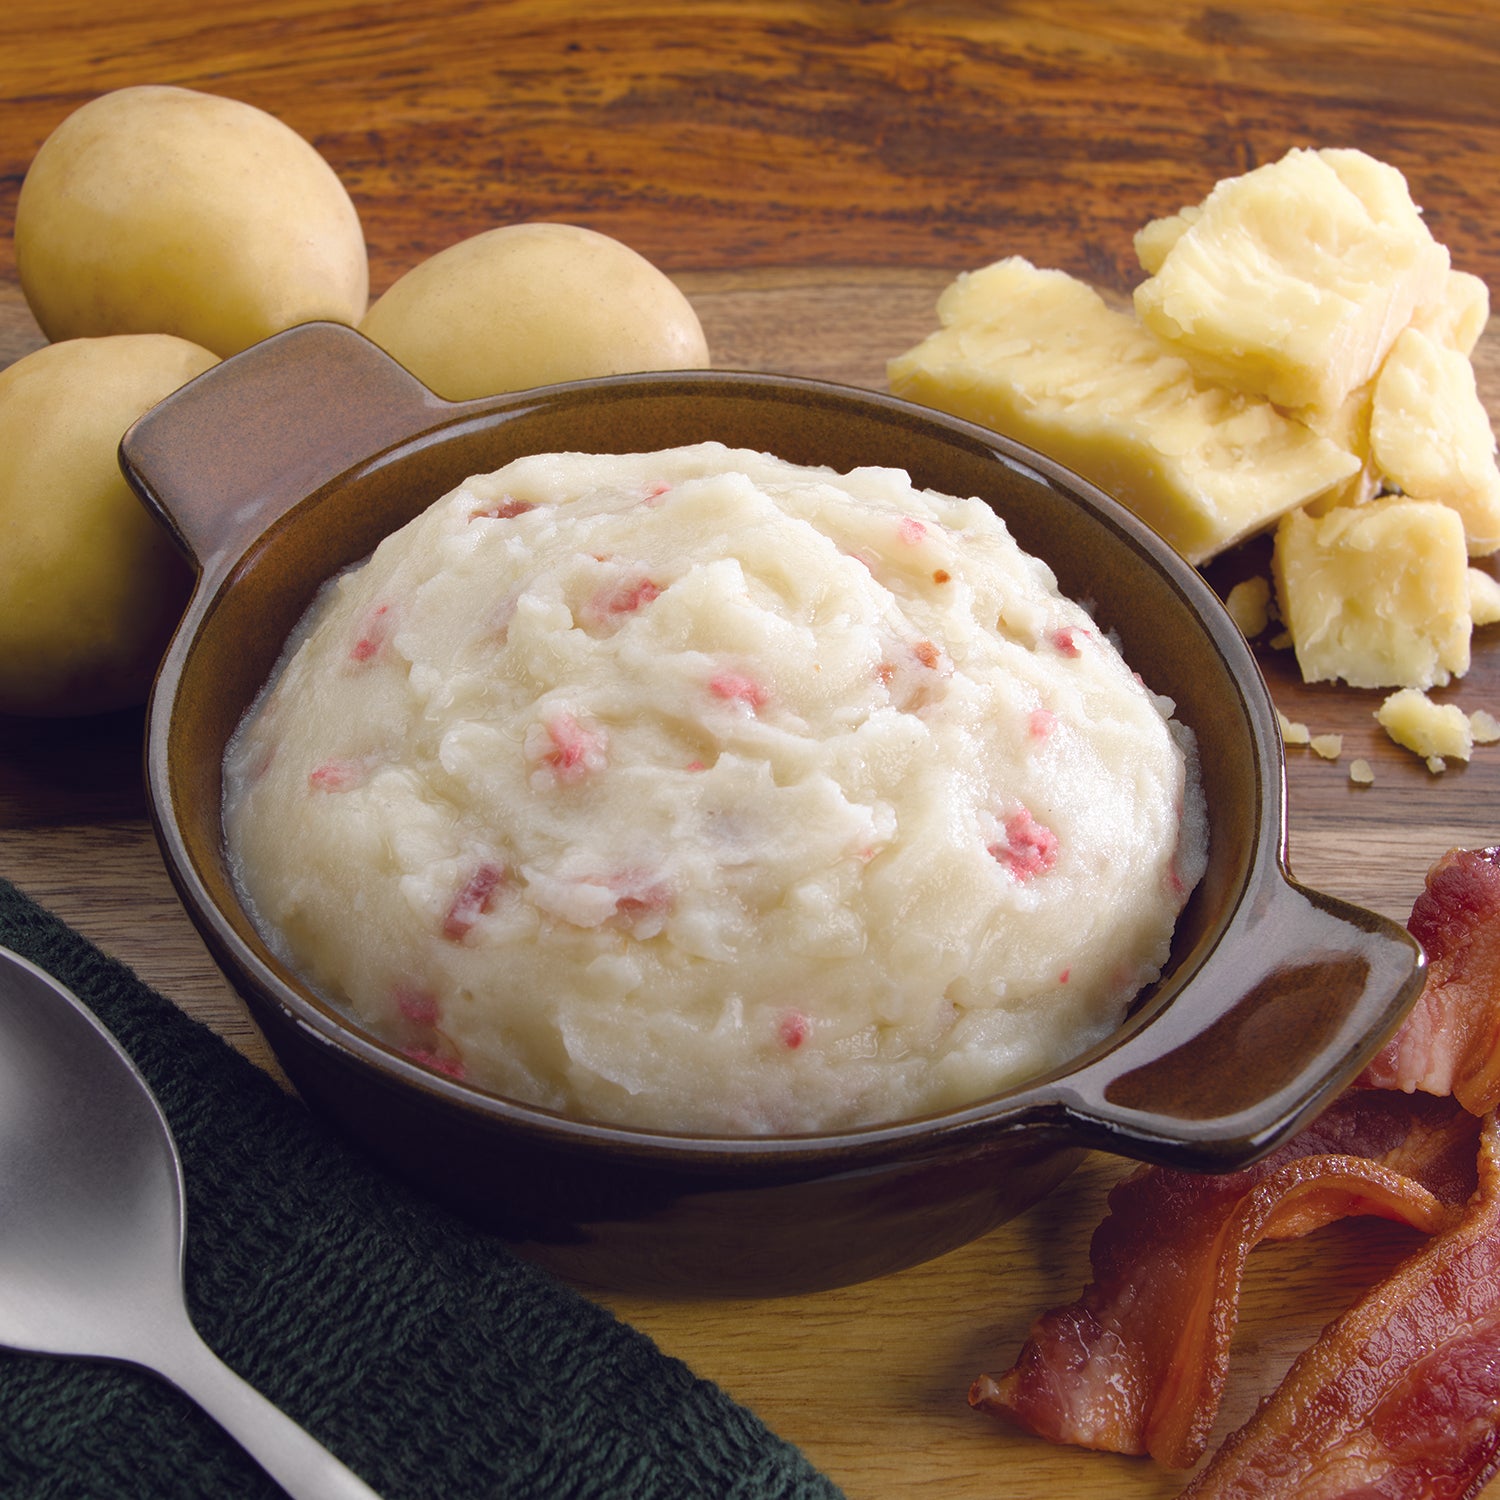 NutriWise - Bacon Cheddar Mashed Potatoes (7/Box) - Doctors Weight Loss